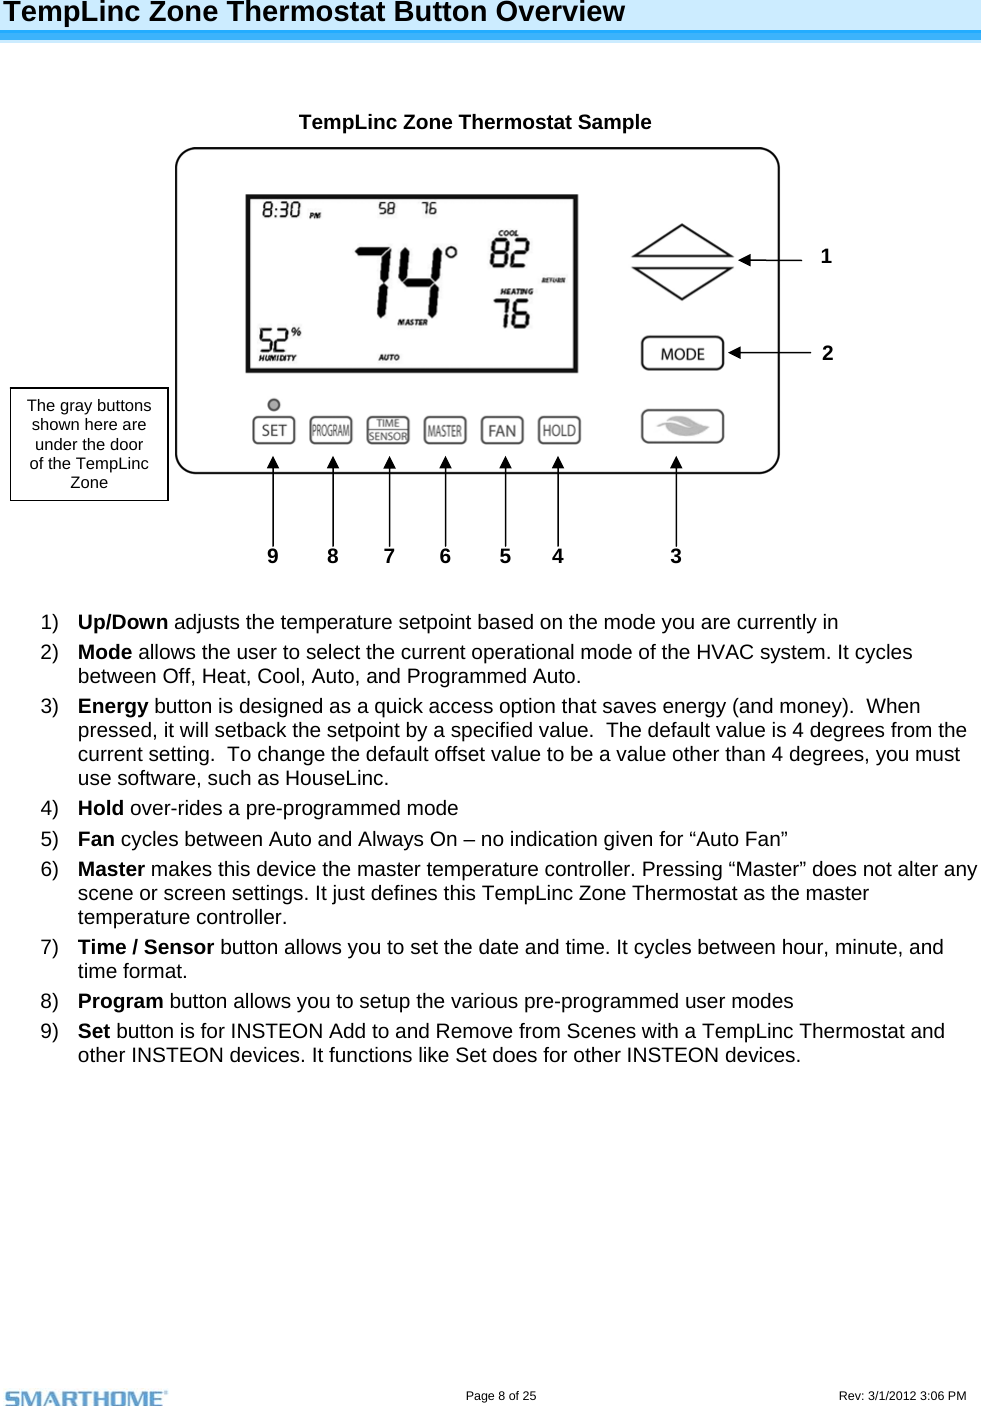                                                                                                                                   Page 8 of 25                                                                                       Rev: 3/1/2012 3:06 PM TempLinc Zone Thermostat Sample The gray buttons shown here are under the door of the TempLinc Zone  TempLinc Zone Thermostat Button Overview                 1)  Up/Down adjusts the temperature setpoint based on the mode you are currently in 2)  Mode allows the user to select the current operational mode of the HVAC system. It cycles between Off, Heat, Cool, Auto, and Programmed Auto. 3)  Energy button is designed as a quick access option that saves energy (and money).  When pressed, it will setback the setpoint by a specified value.  The default value is 4 degrees from the current setting.  To change the default offset value to be a value other than 4 degrees, you must use software, such as HouseLinc. 4)  Hold over-rides a pre-programmed mode 5)  Fan cycles between Auto and Always On – no indication given for “Auto Fan” 6)  Master makes this device the master temperature controller. Pressing “Master” does not alter any scene or screen settings. It just defines this TempLinc Zone Thermostat as the master temperature controller. 7)  Time / Sensor button allows you to set the date and time. It cycles between hour, minute, and time format. 8)  Program button allows you to setup the various pre-programmed user modes 9)  Set button is for INSTEON Add to and Remove from Scenes with a TempLinc Thermostat and other INSTEON devices. It functions like Set does for other INSTEON devices. 2 1 4 5 6 7 8 9 3 